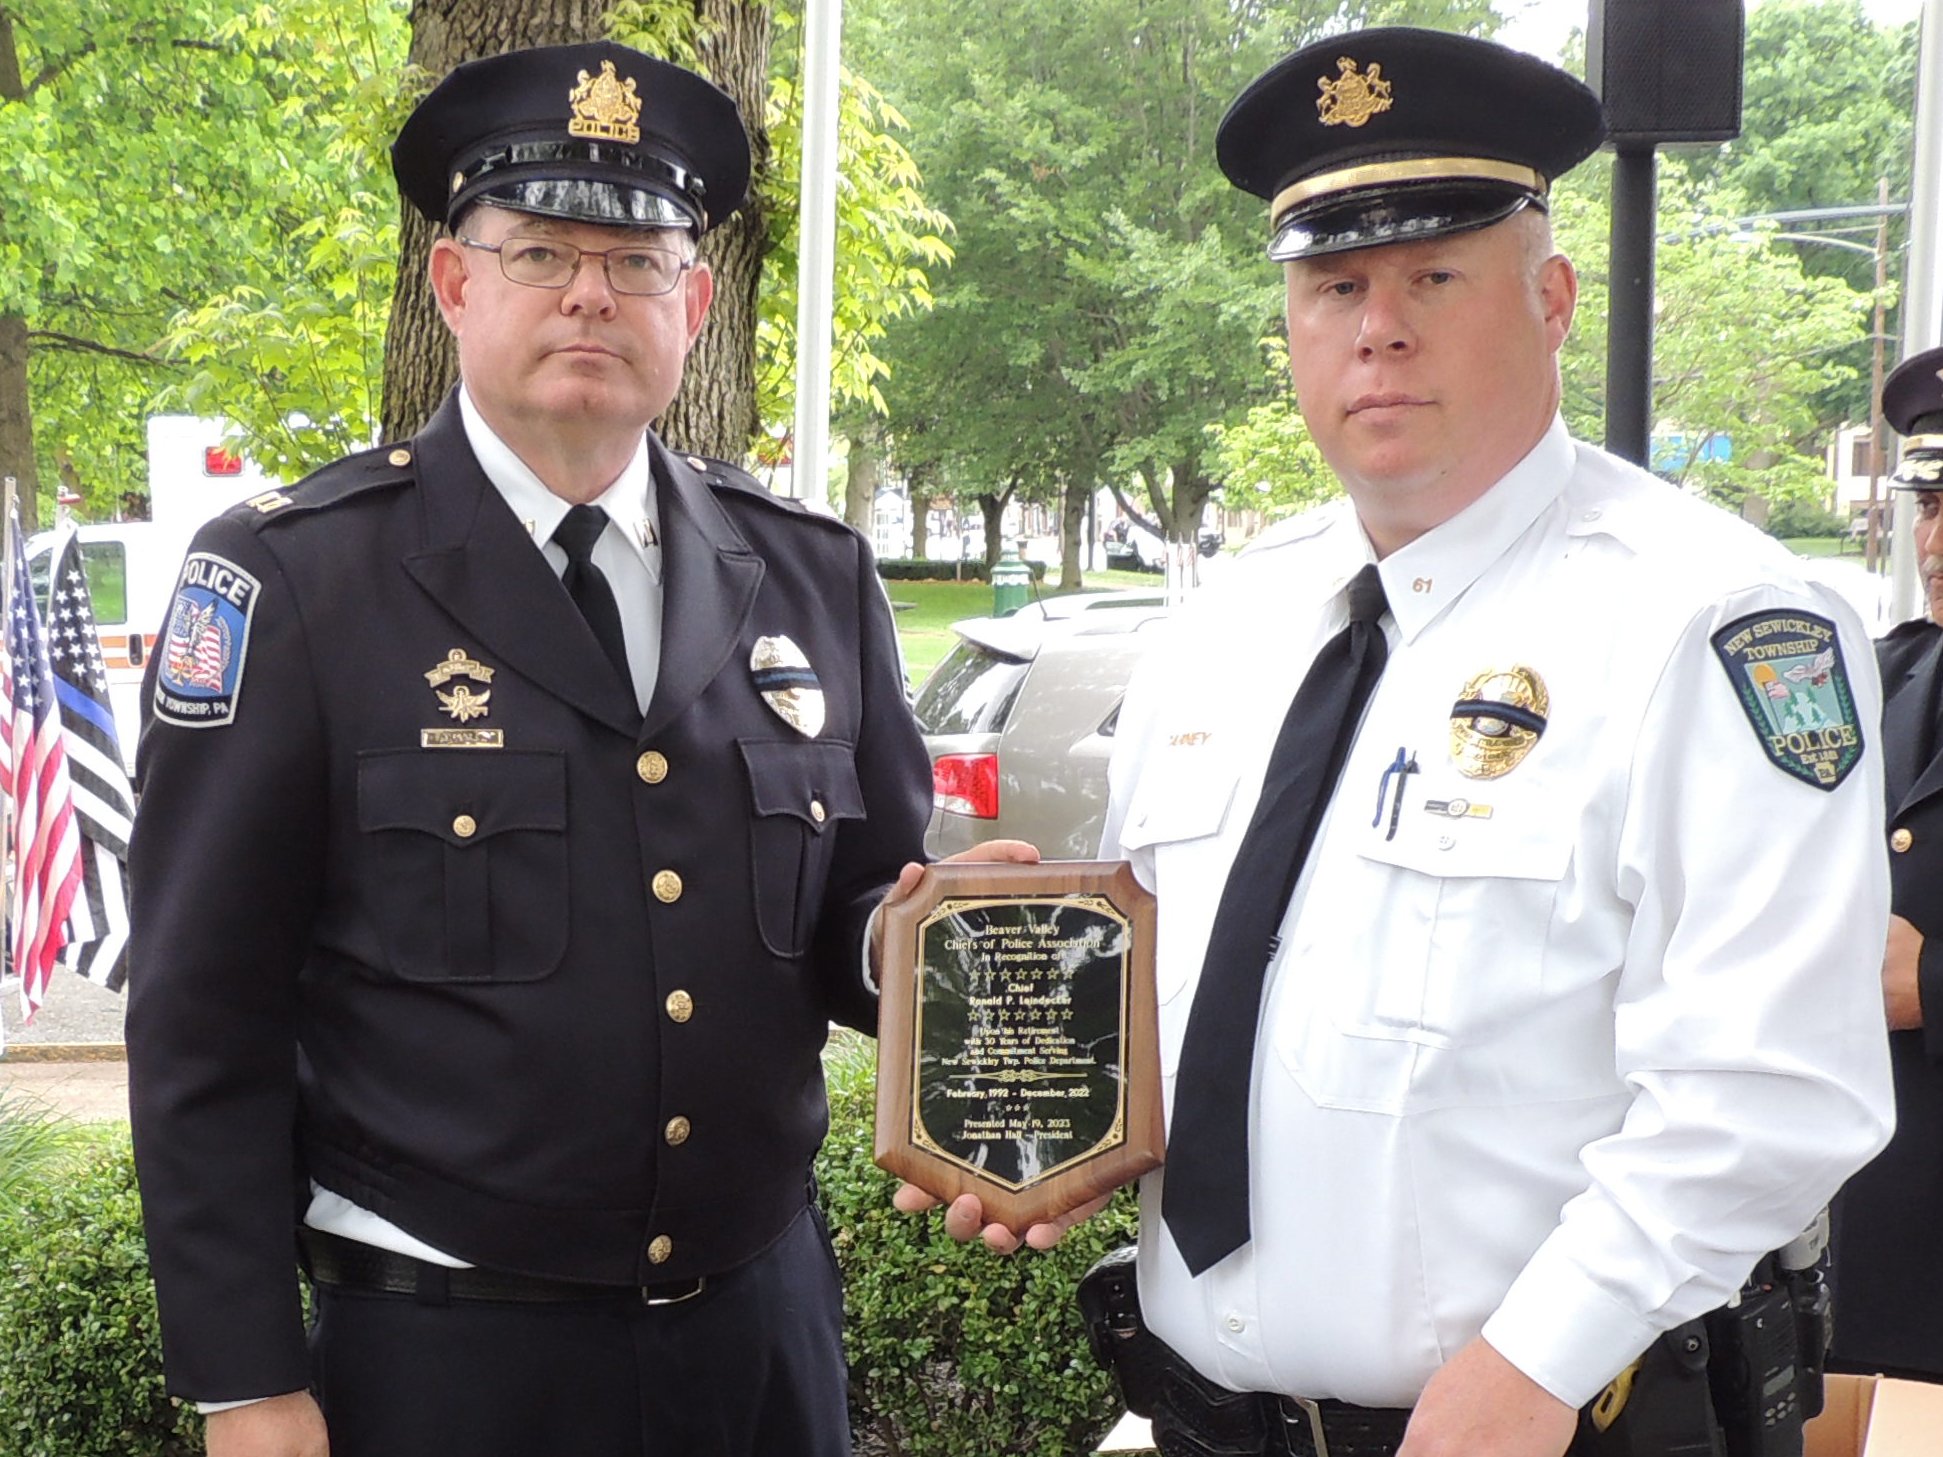 Captain Jonathan Hall presents Chief Ronald Leindecker's (not pictured) retiree plaque for his 30 years of service to New Sewickley Twp. Police Dept. Current Chief Greg Carney accepted on his behalf.